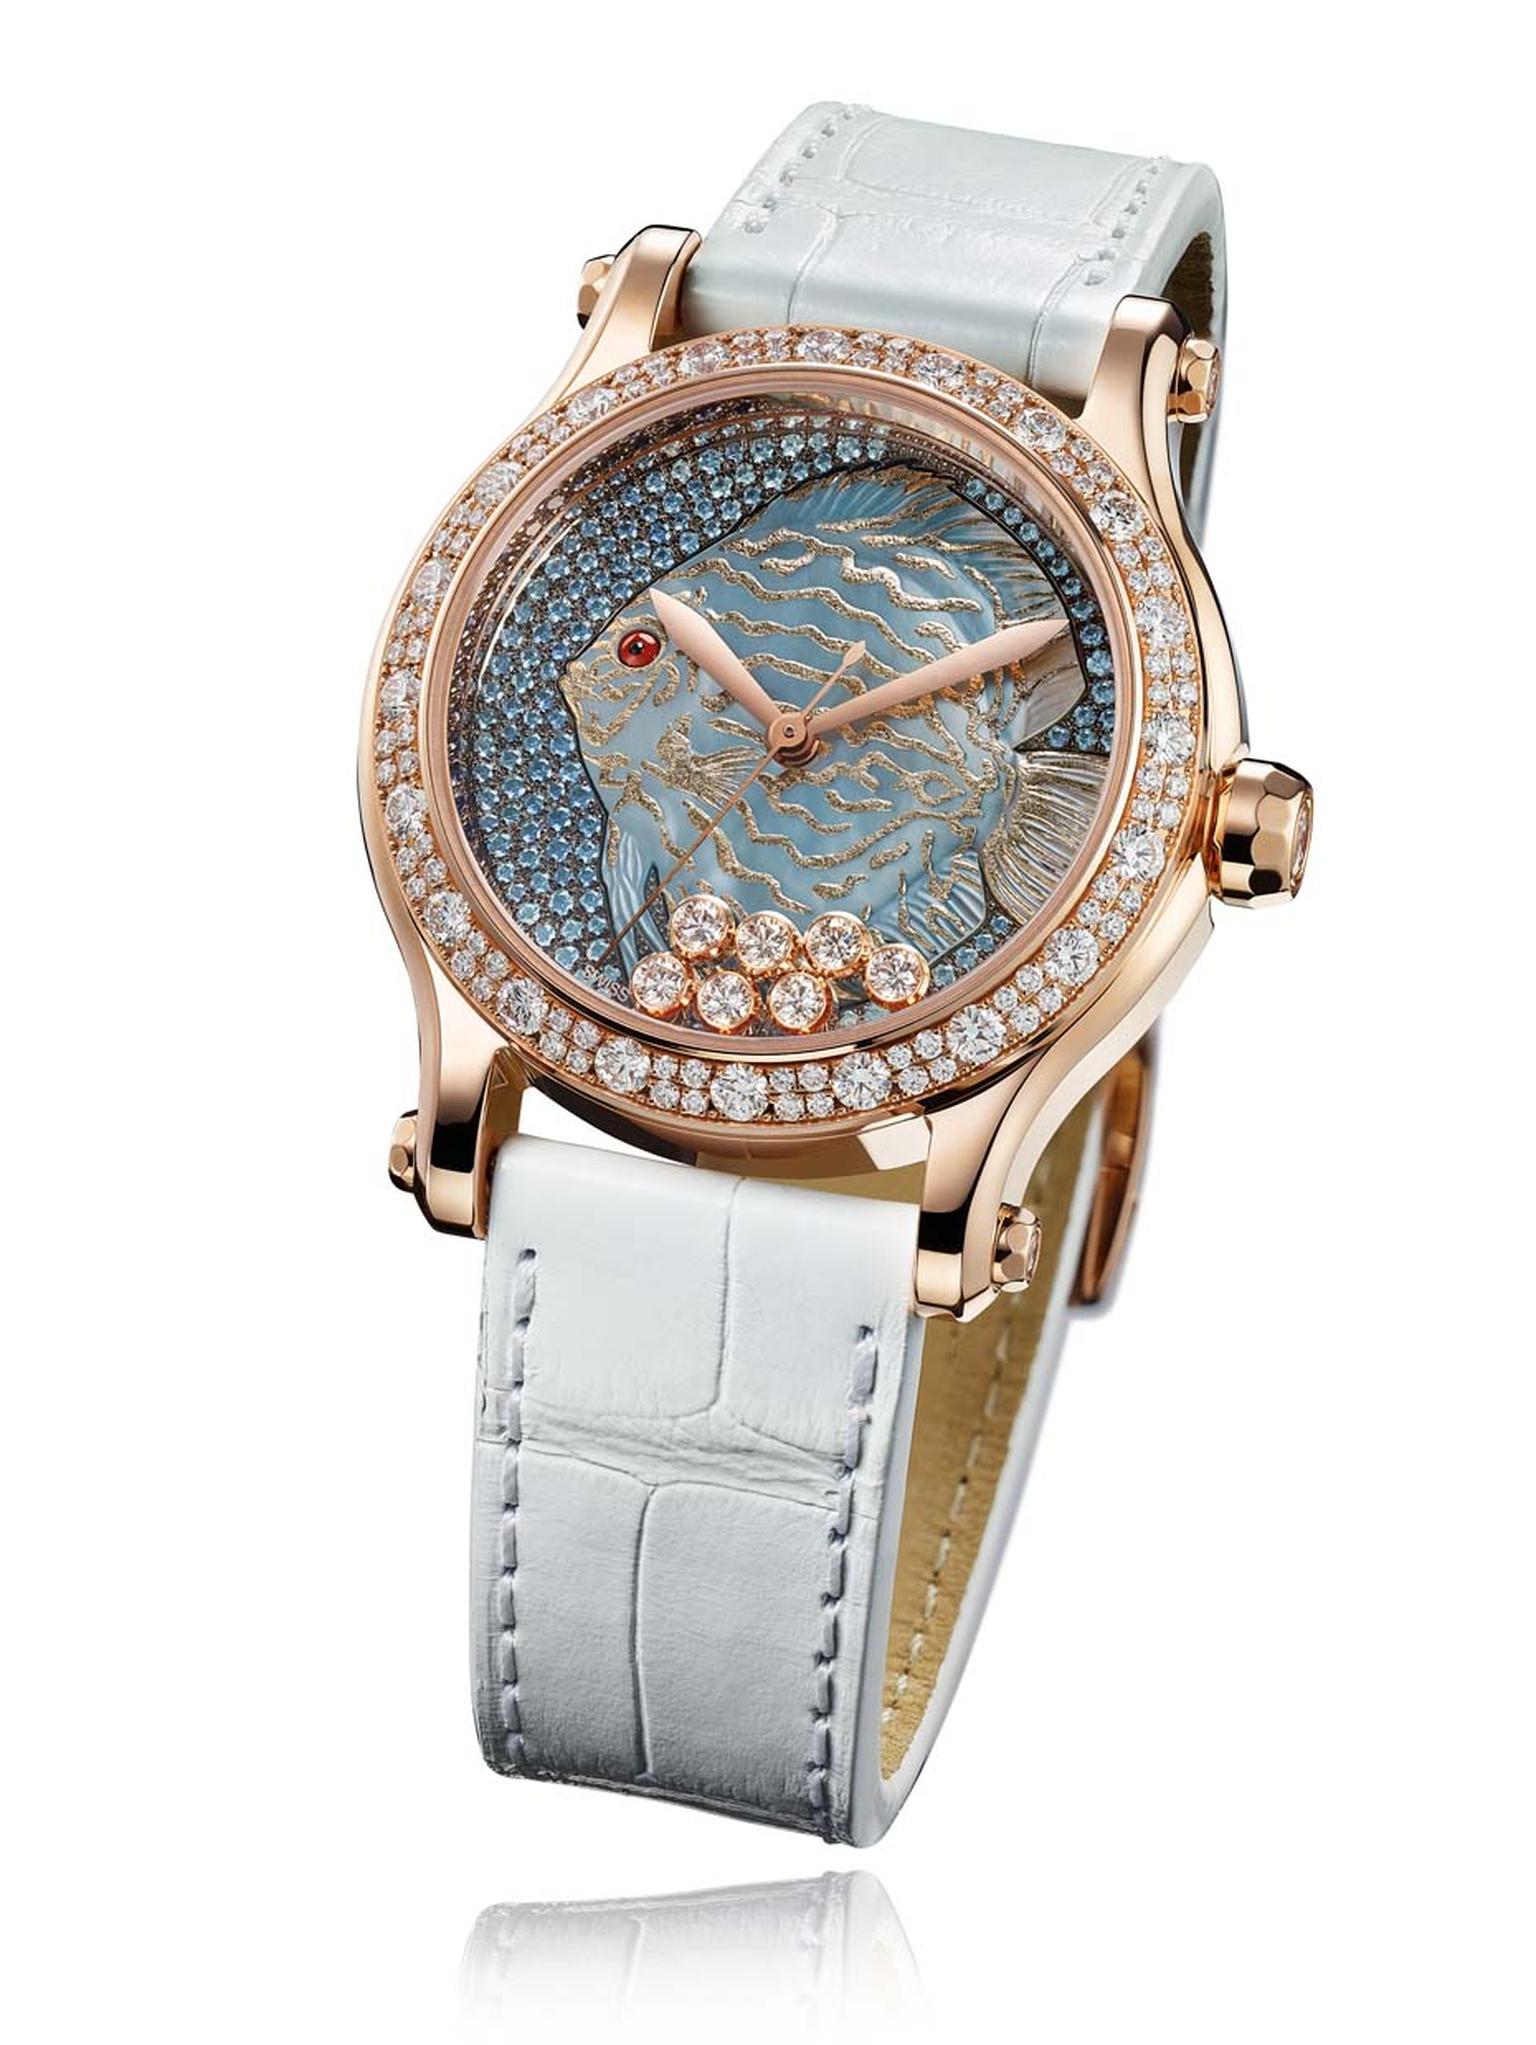 The new Chopard Happy Fish watch showcases the skill of the Maison's artisans, who have engraved the fish from shimmering mother-of-pearl and enhanced its contours with gold leaf. The graded shades of snow-set blue sapphires to simulate the sea are housed